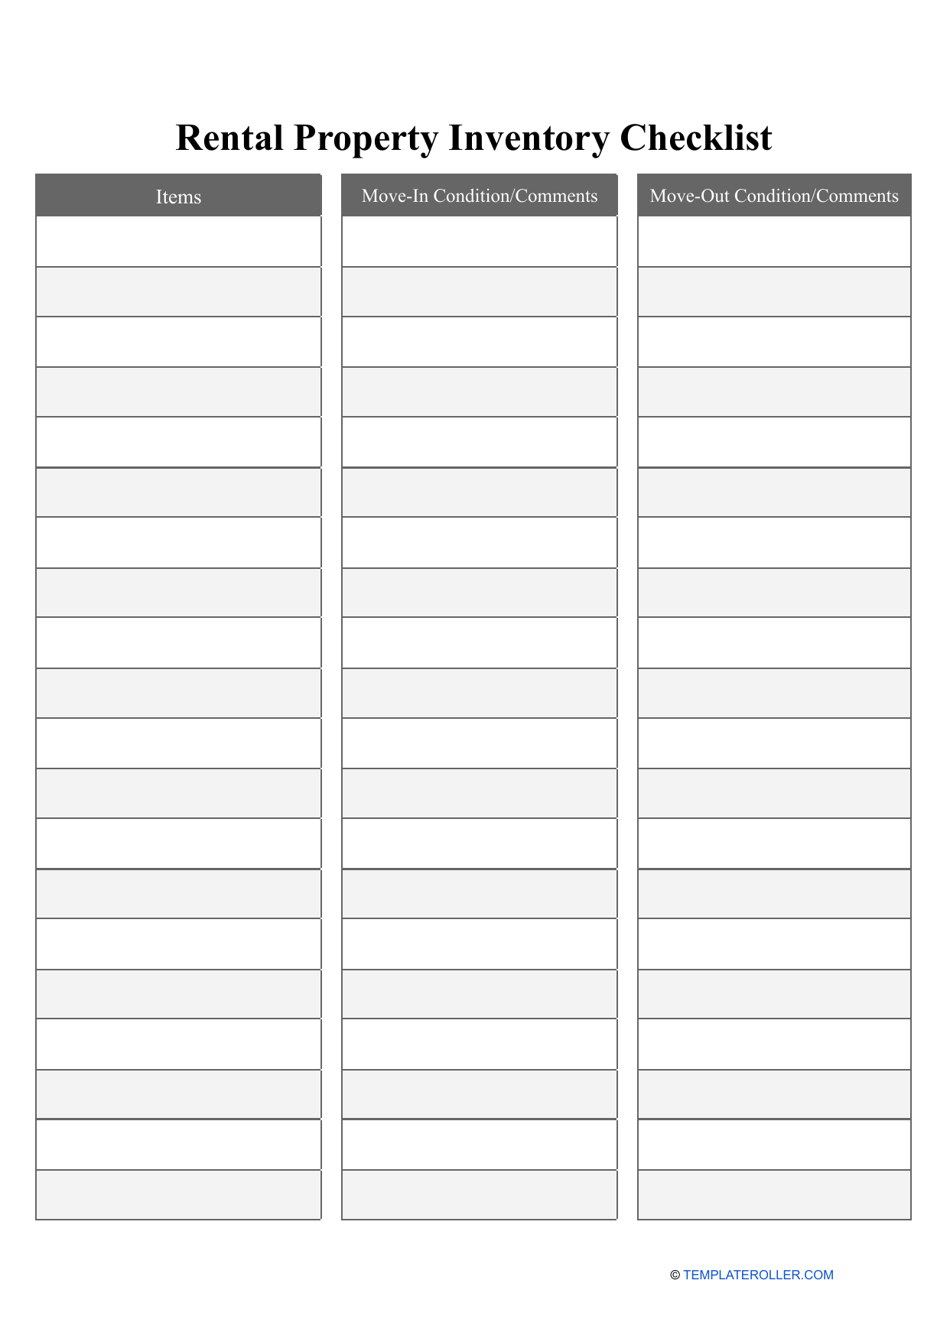 Rental Property Inventory Checklist Template - Table, Page 1